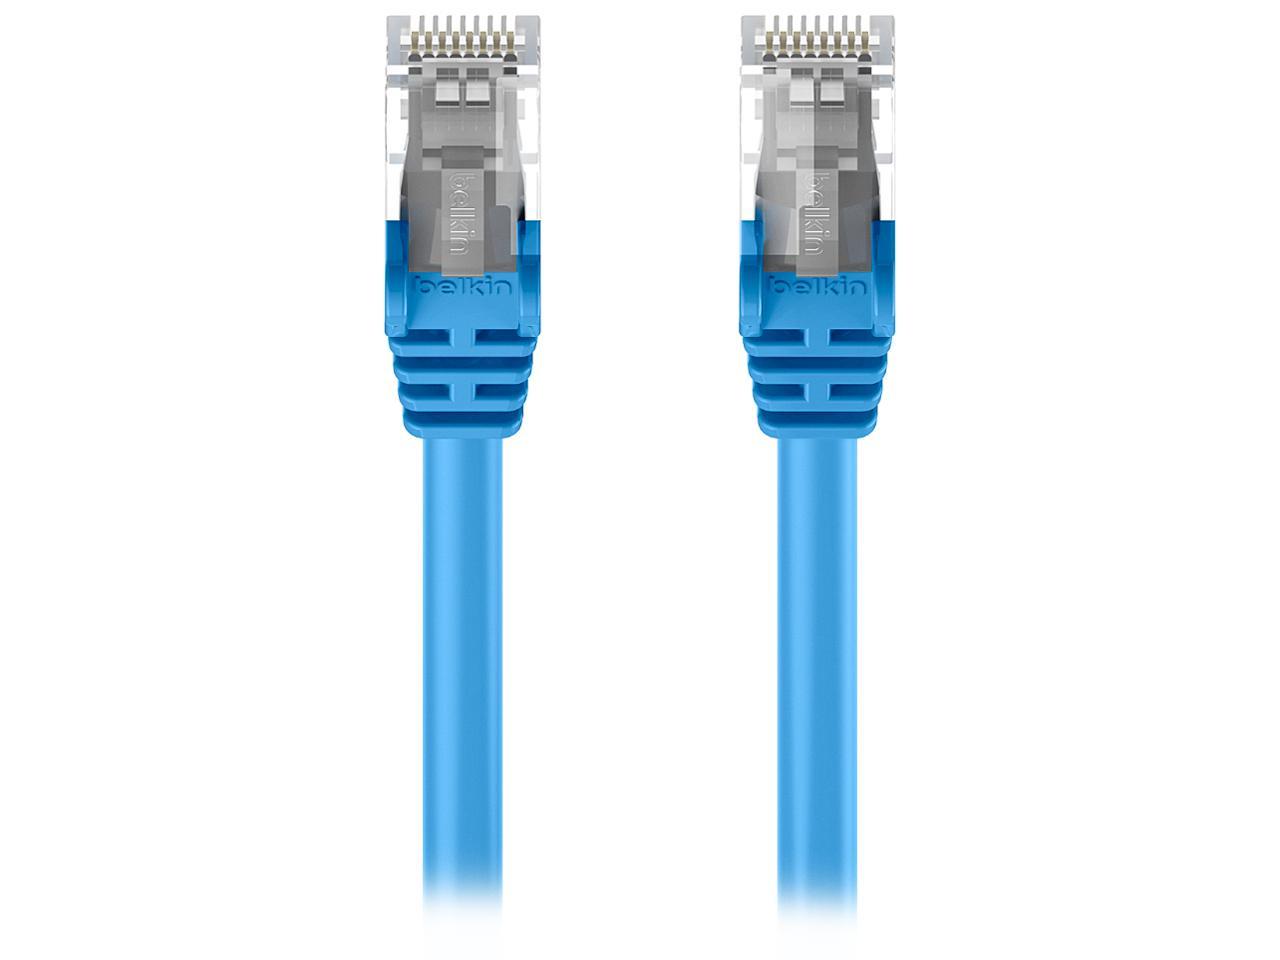 Belkin A3L980-75-BLU-S 75 ft. Cat 6 Blue Snagless Networking Cable - image 2 of 3